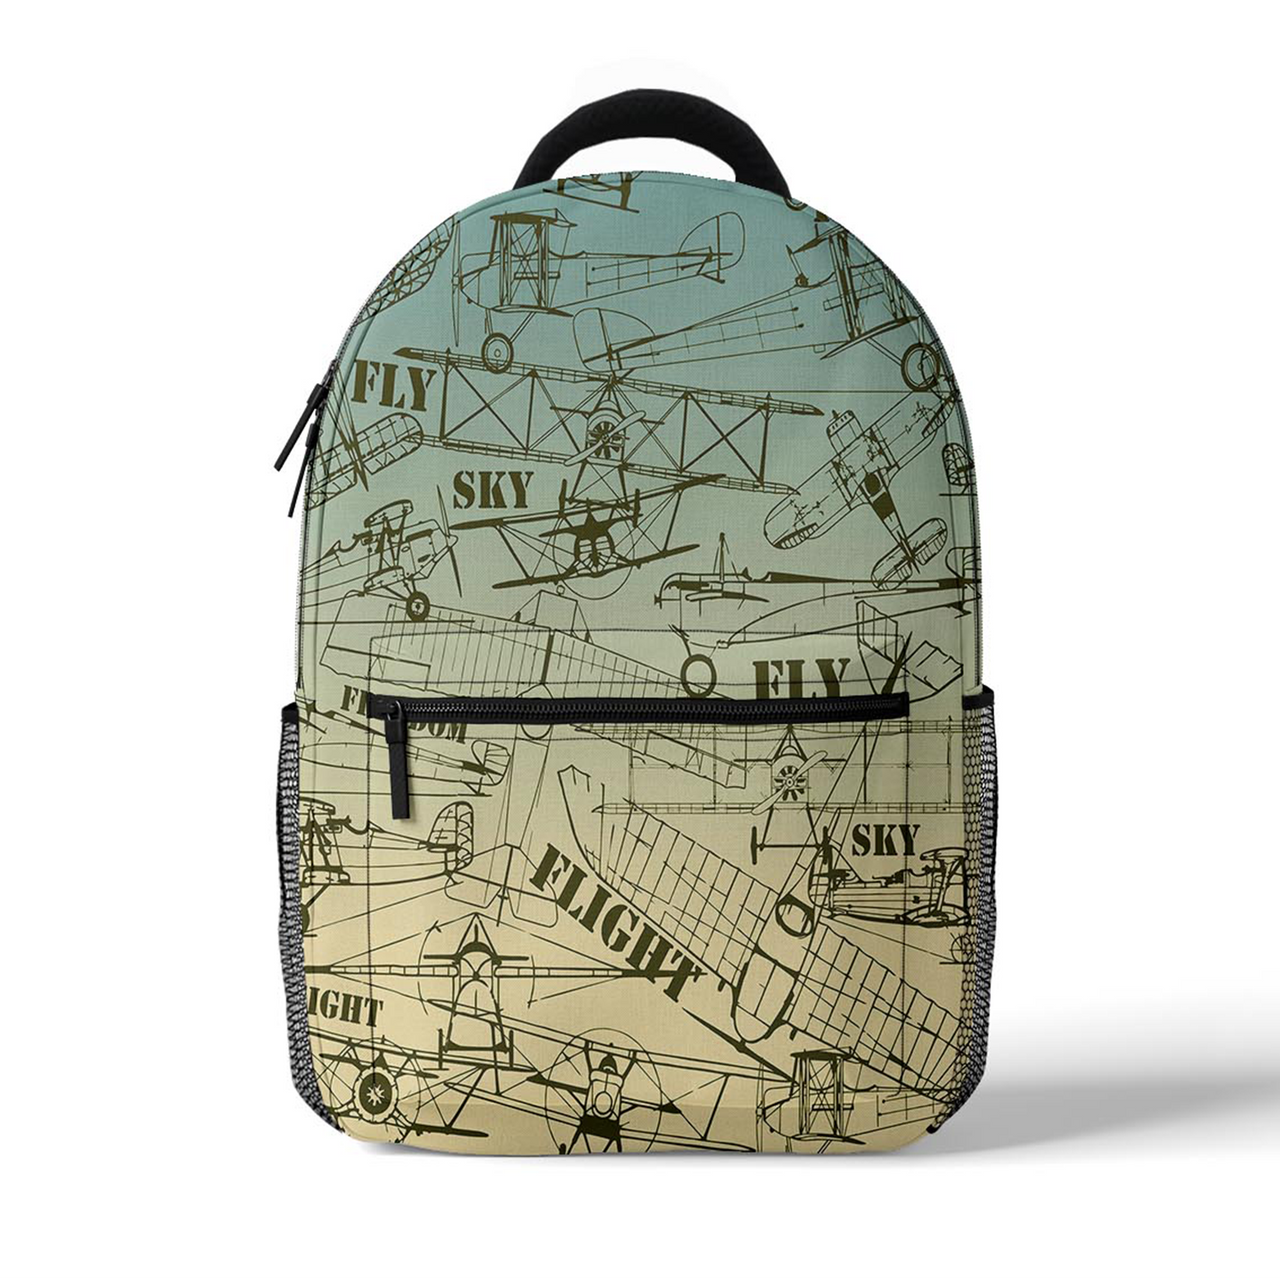 Retro Airplanes & Text Designed 3D Backpacks